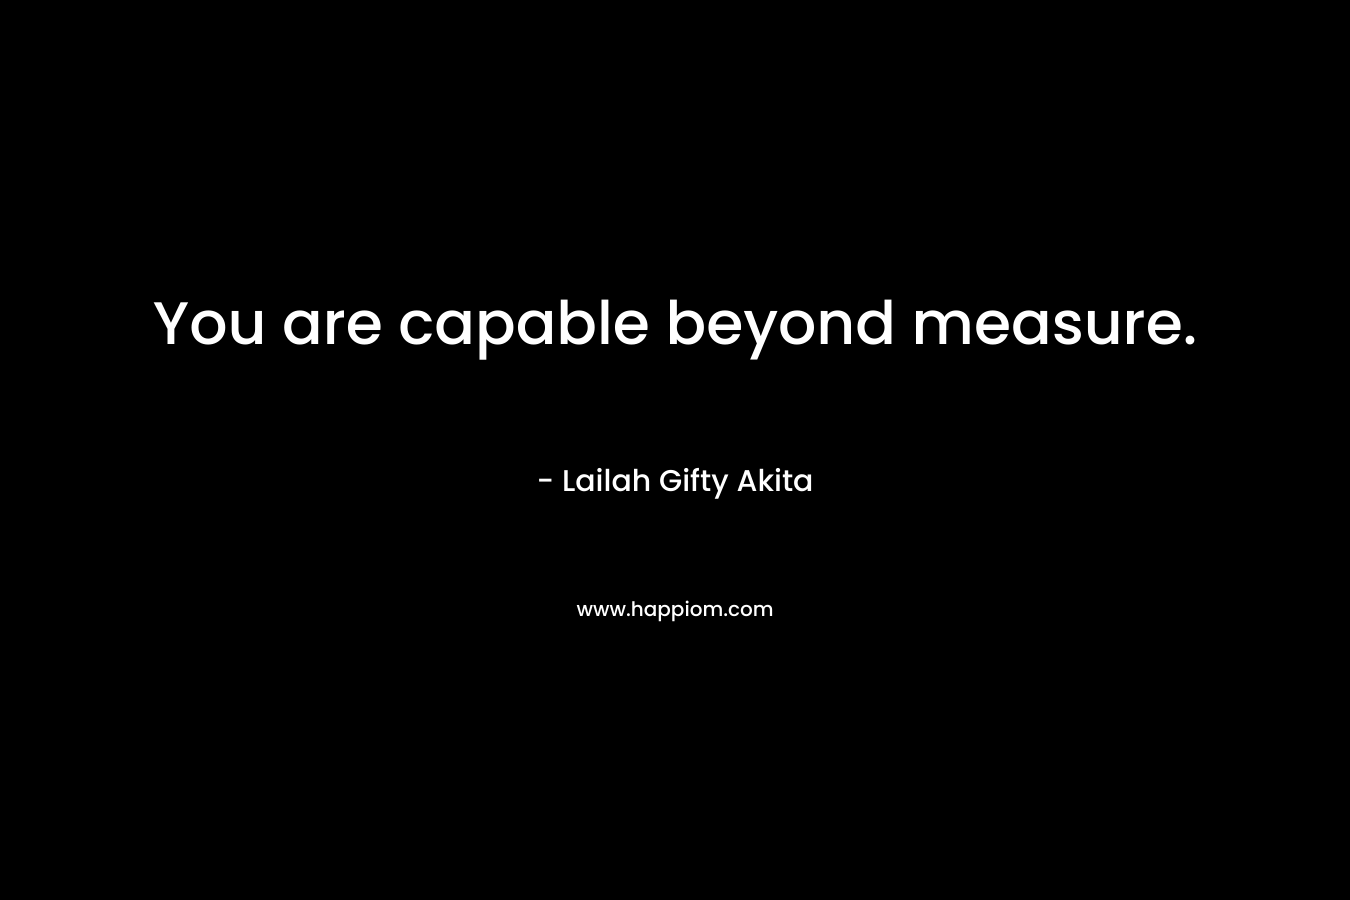 You are capable beyond measure.